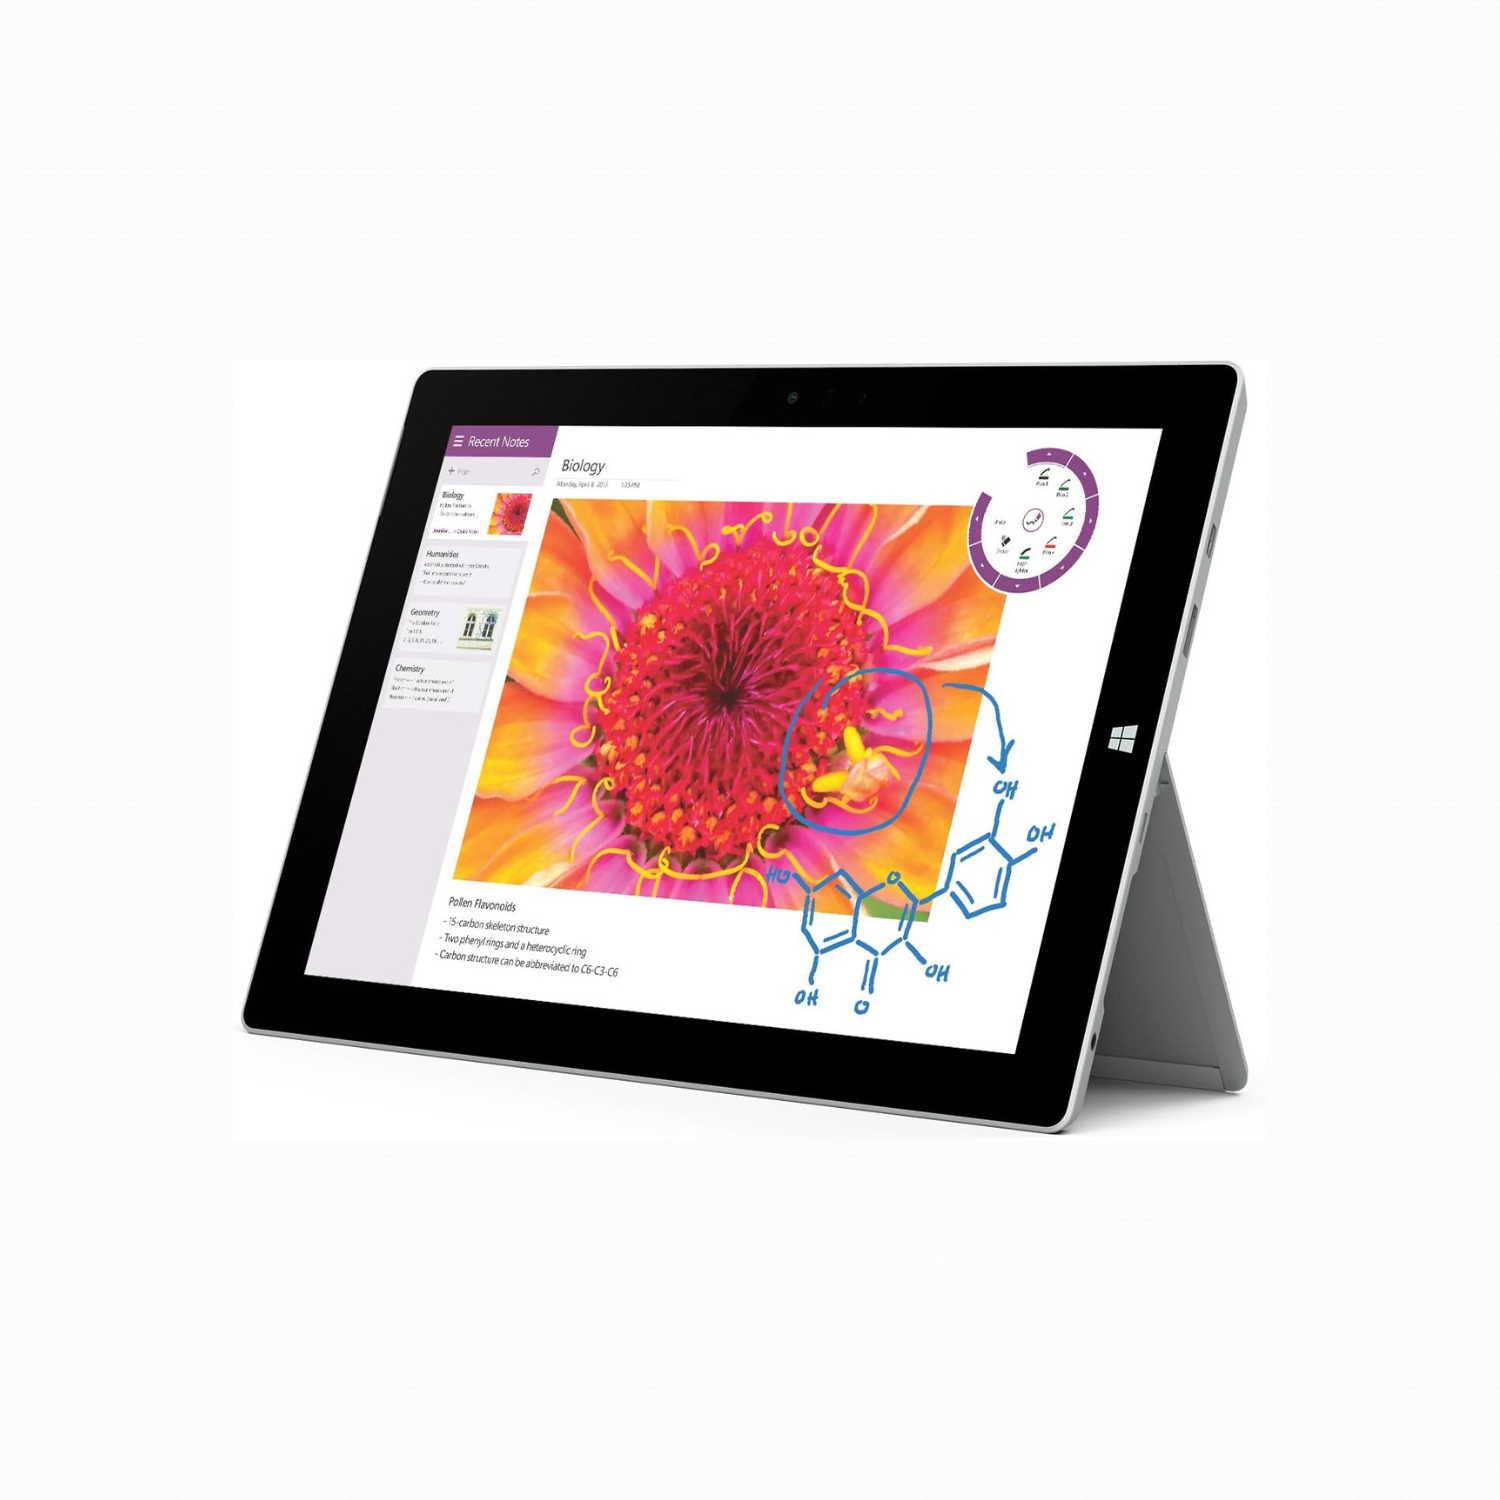 Microsoft Surface 3 10.8" Tablet | 1645